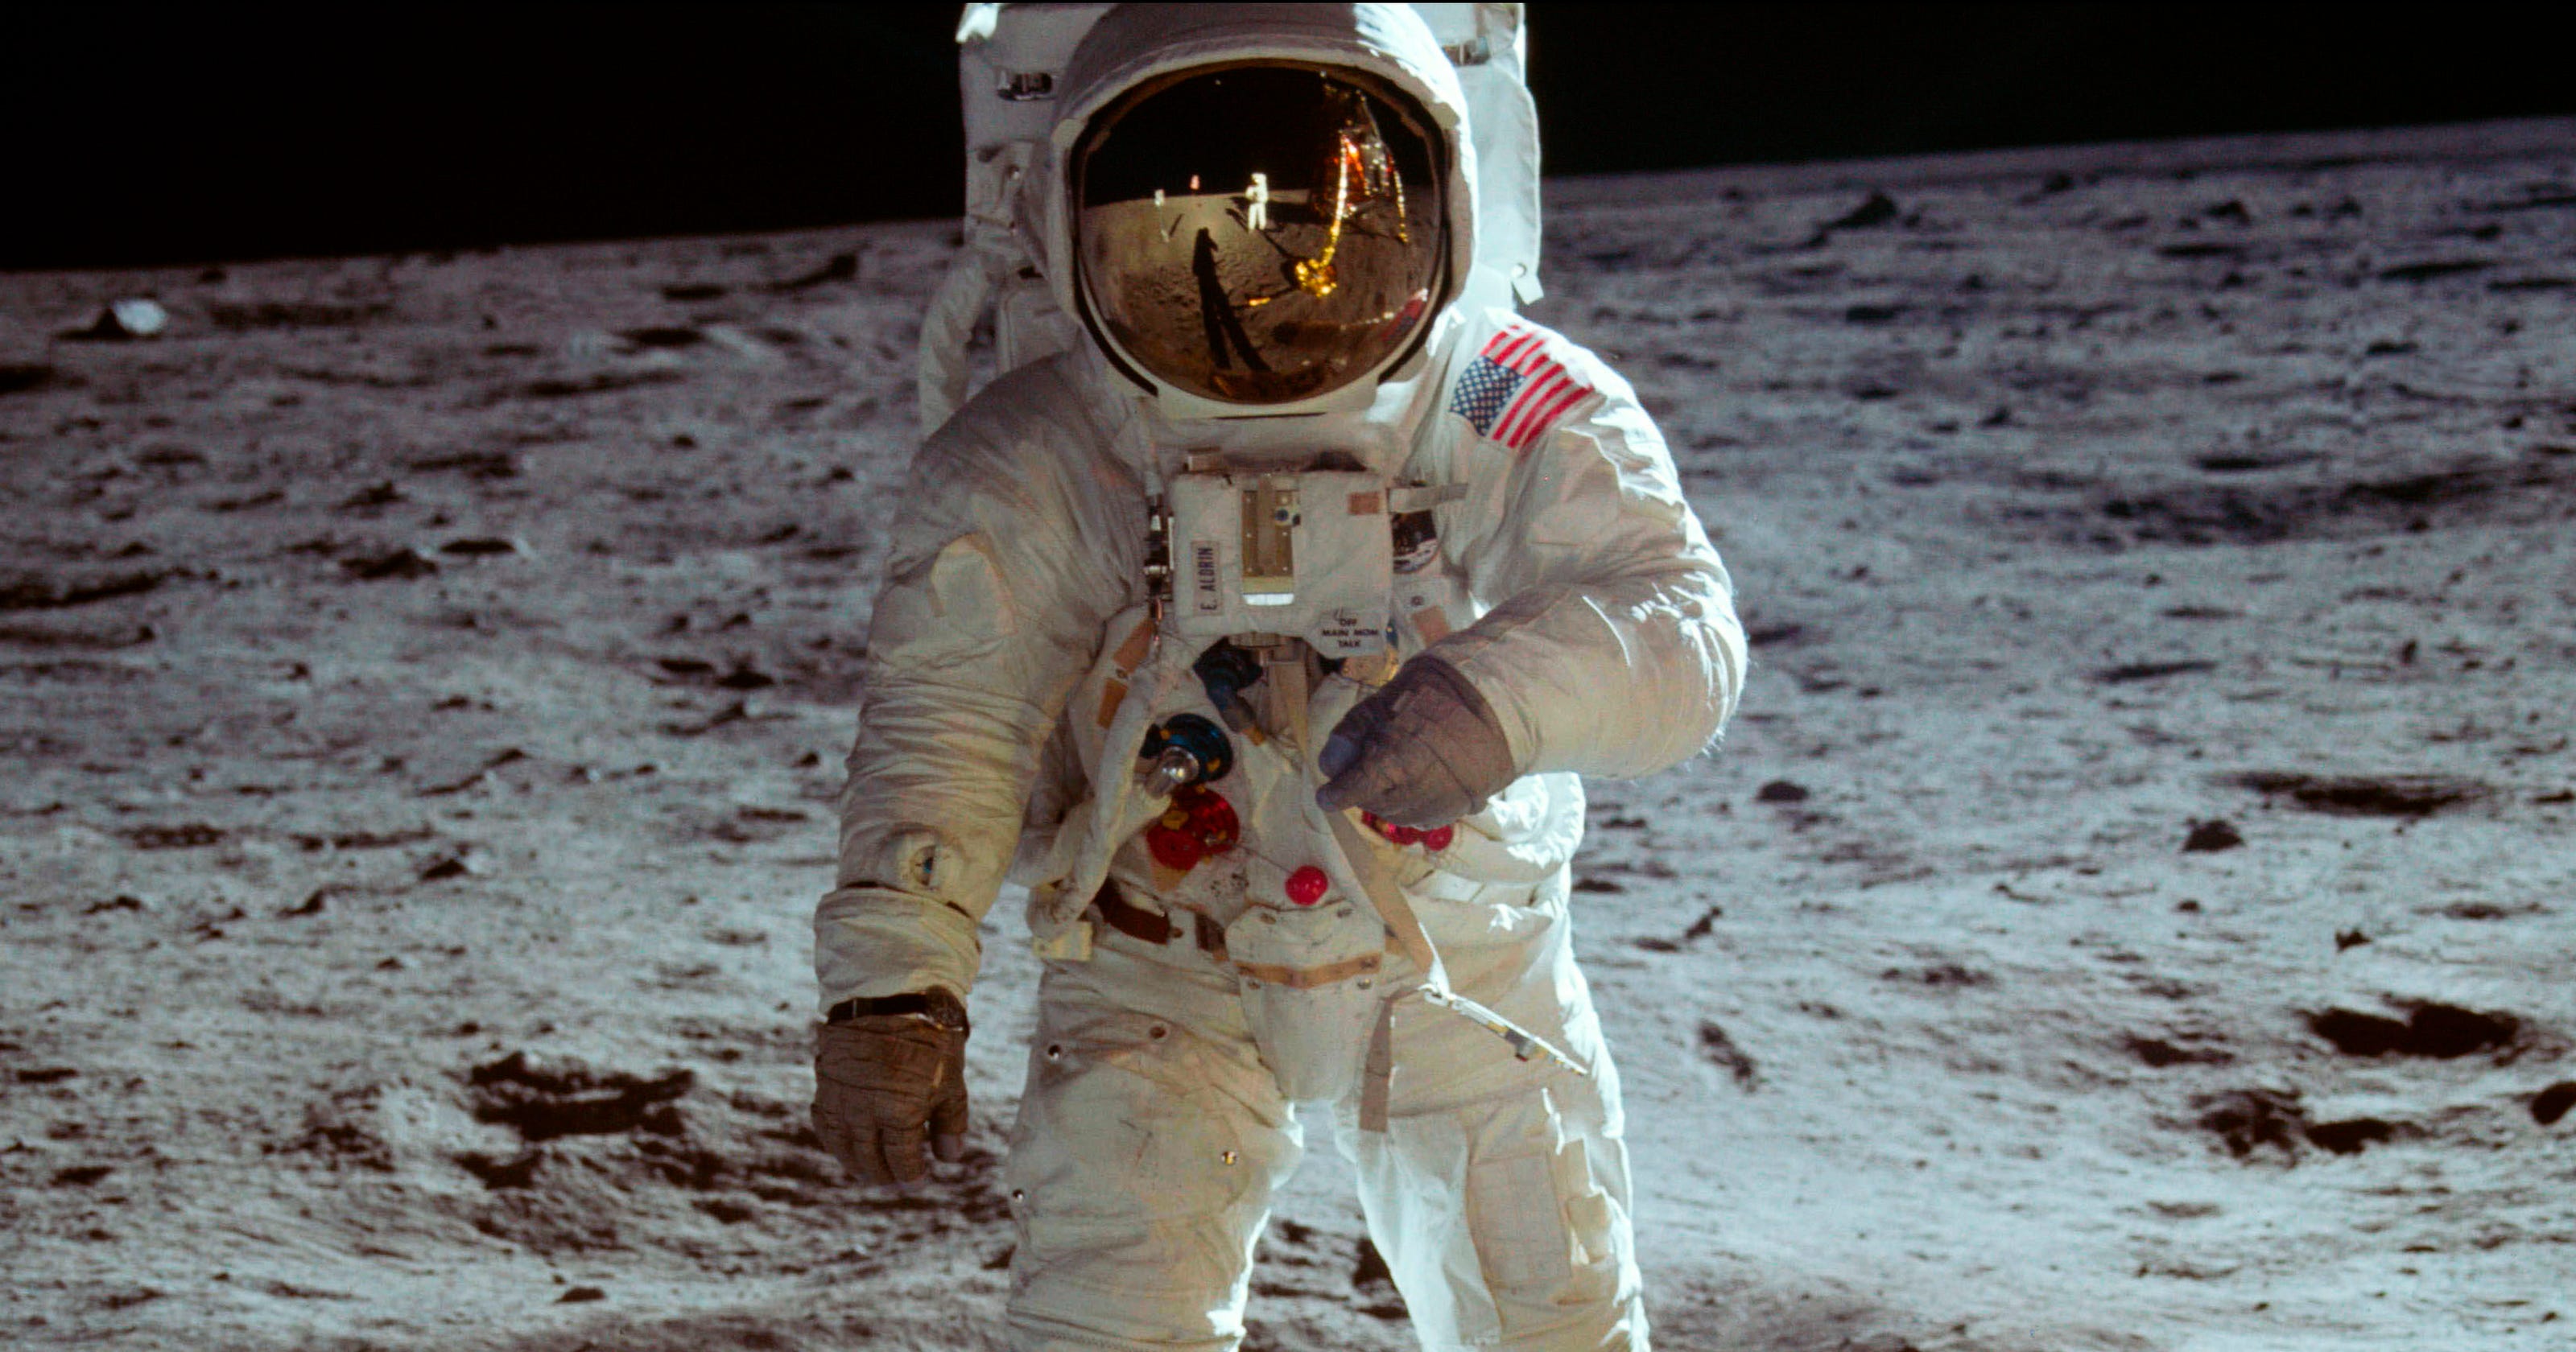 Moon landing's 50th anniversary looms large in July